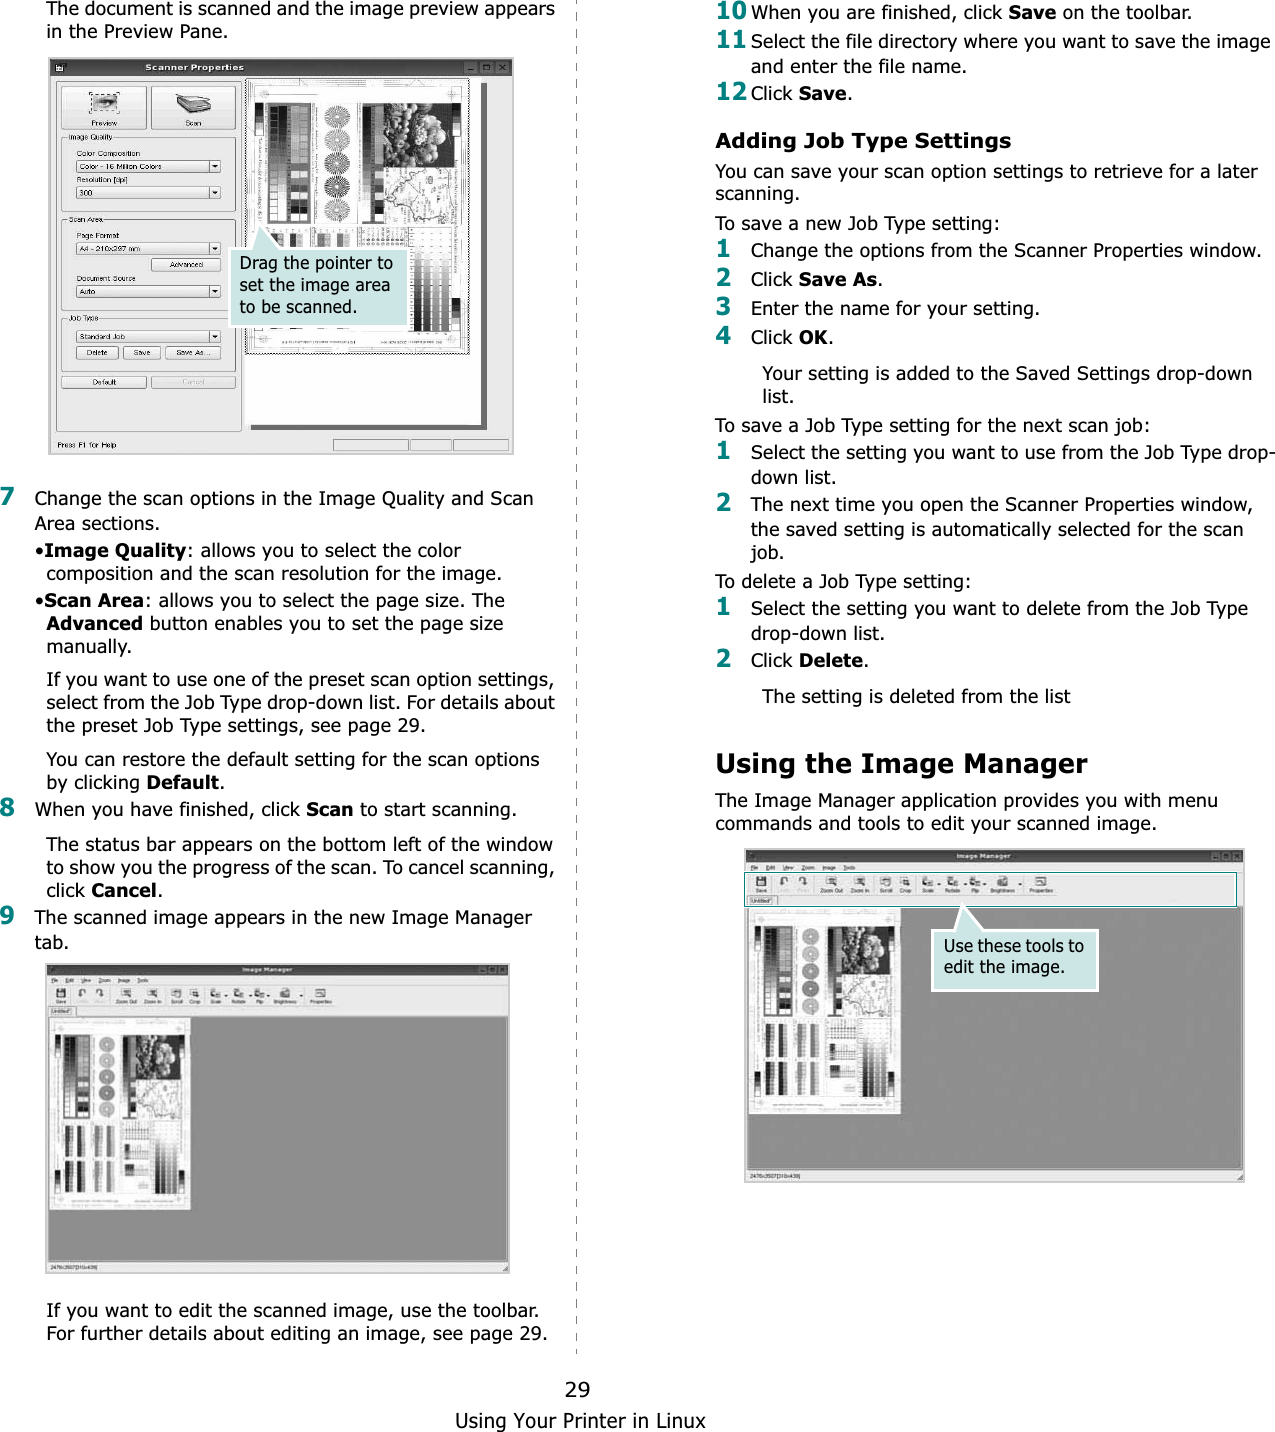 Using Your Printer in Linux29The document is scanned and the image preview appears in the Preview Pane.7Change the scan options in the Image Quality and Scan Area sections.•Image Quality: allows you to select the color composition and the scan resolution for the image.•Scan Area: allows you to select the page size. The Advanced button enables you to set the page size manually.If you want to use one of the preset scan option settings, select from the Job Type drop-down list. For details about the preset Job Type settings, see page 29.You can restore the default setting for the scan options by clicking Default.8When you have finished, click Scan to start scanning.The status bar appears on the bottom left of the window to show you the progress of the scan. To cancel scanning, clickCancel.9The scanned image appears in the new Image Manager tab.If you want to edit the scanned image, use the toolbar. For further details about editing an image, see page 29.Drag the pointer to set the image area to be scanned.10When you are finished, click Save on the toolbar.11Select the file directory where you want to save the image and enter the file name. 12Click Save.Adding Job Type SettingsYou can save your scan option settings to retrieve for a later scanning.To save a new Job Type setting:1Change the options from the Scanner Properties window.2Click Save As.3Enter the name for your setting.4Click OK.Your setting is added to the Saved Settings drop-down list.To save a Job Type setting for the next scan job:1Select the setting you want to use from the Job Type drop-down list.2The next time you open the Scanner Properties window, the saved setting is automatically selected for the scan job.To delete a Job Type setting:1Select the setting you want to delete from the Job Type drop-down list.2Click Delete.The setting is deleted from the listUsing the Image ManagerThe Image Manager application provides you with menu commands and tools to edit your scanned image.Use these tools to edit the image.